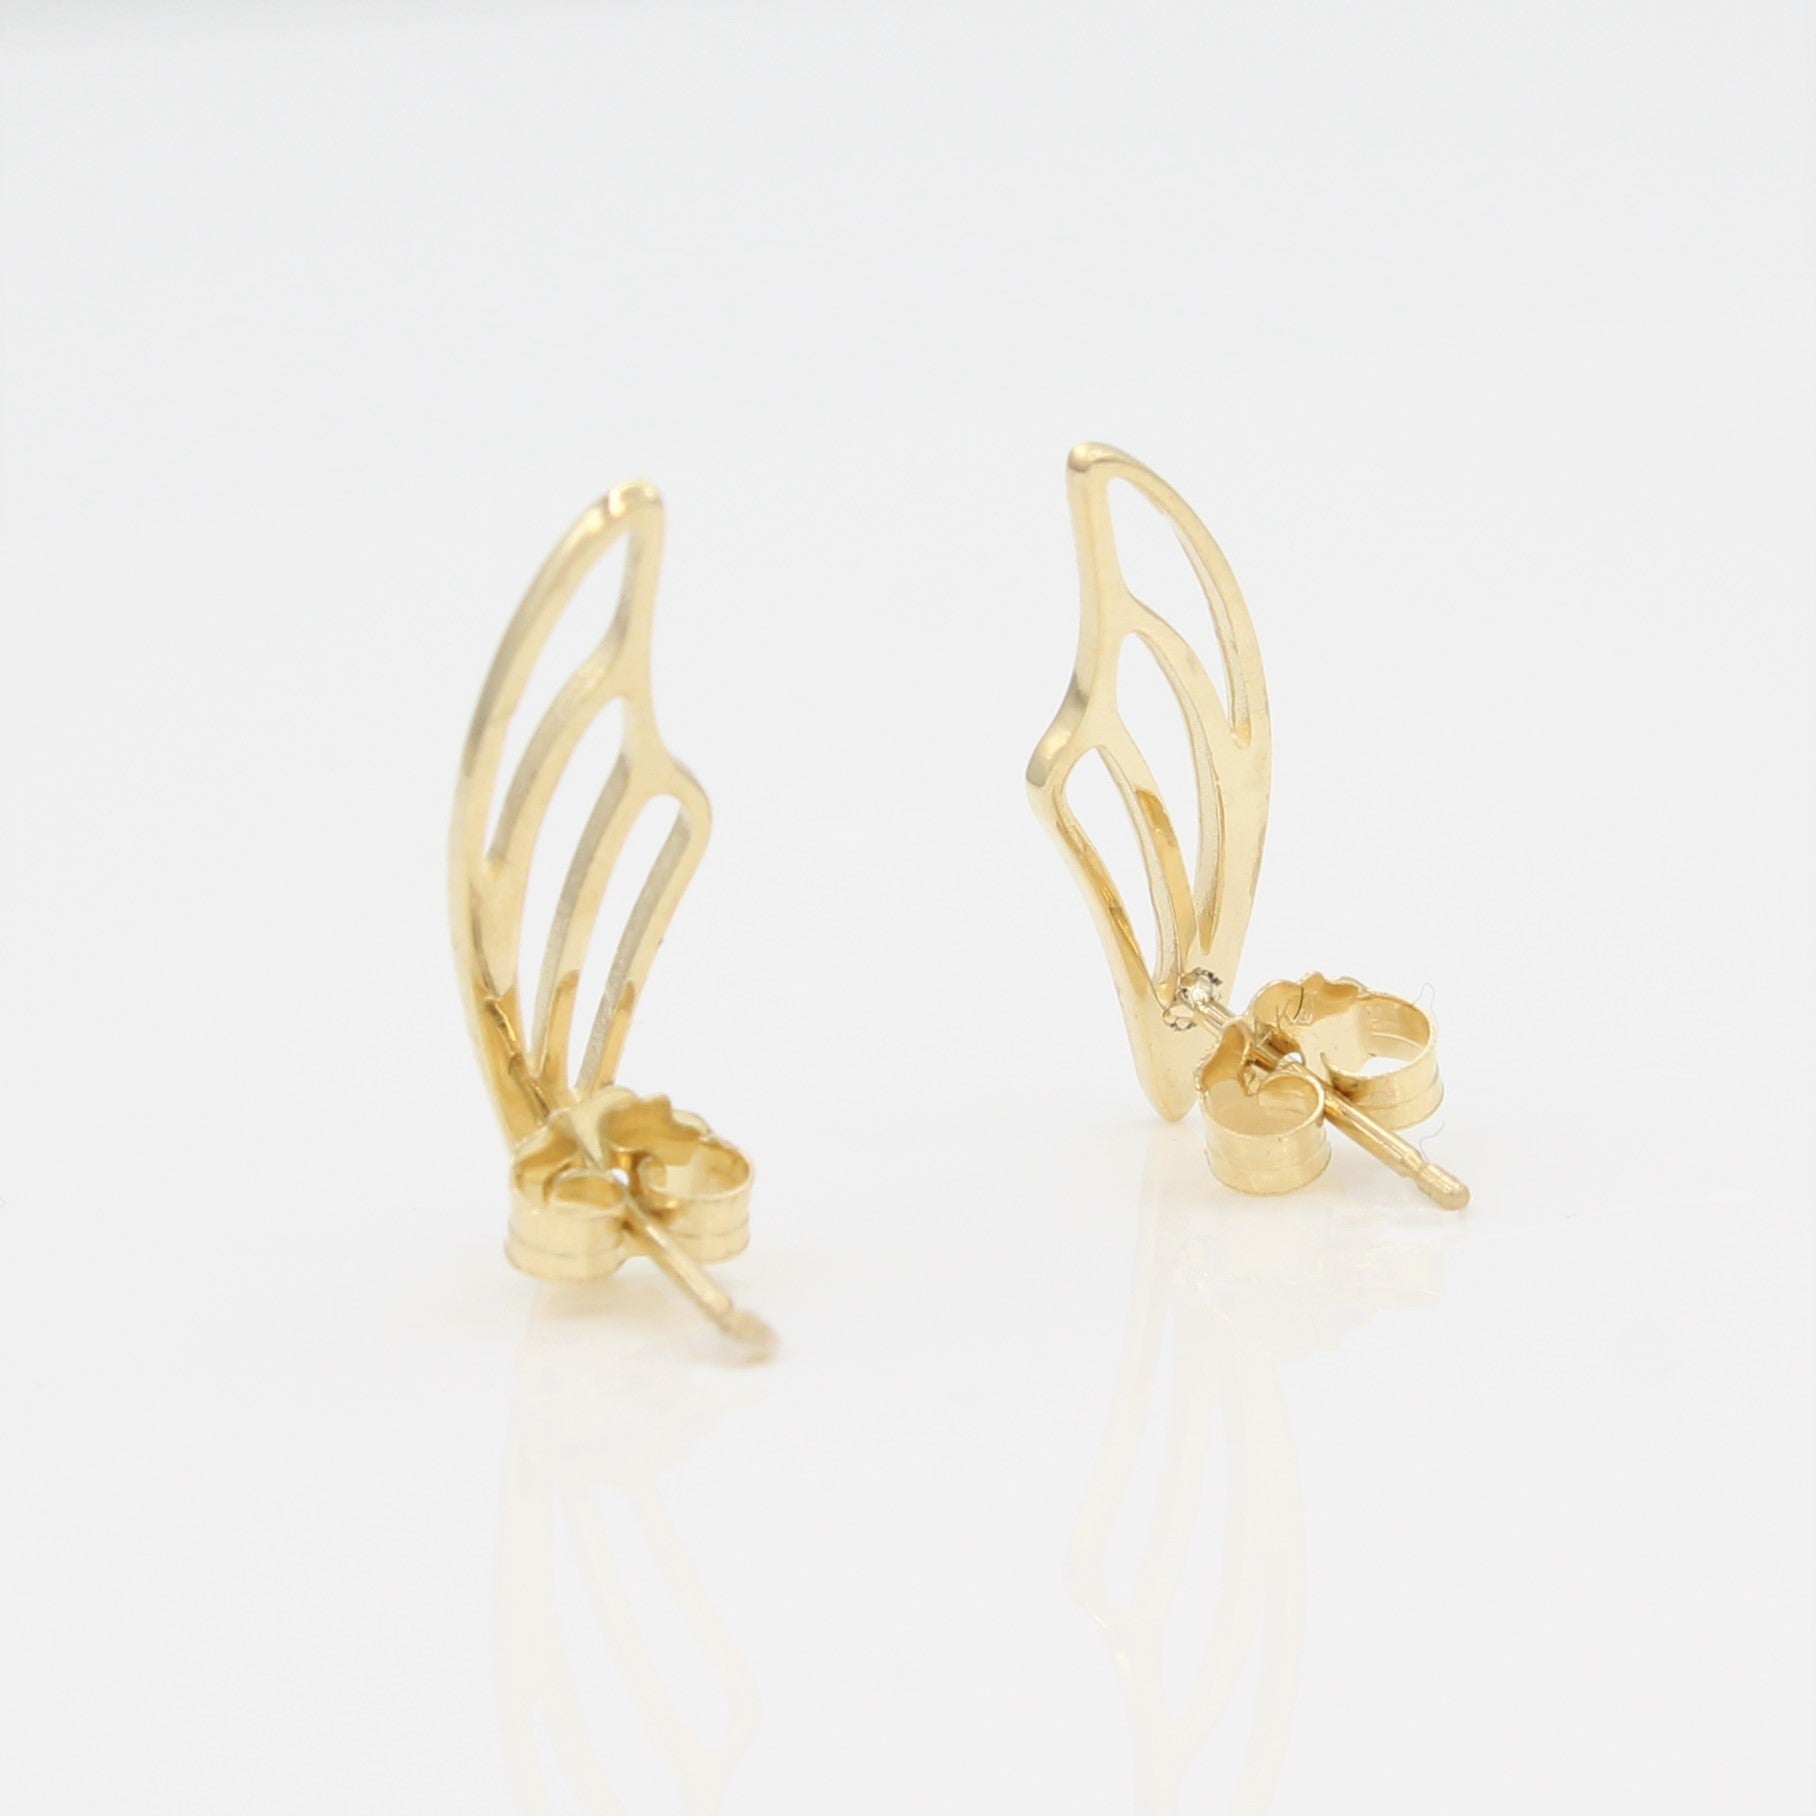 14k Yellow Gold Fairy Wing Ear Climbers Earrings with Posts, back view.